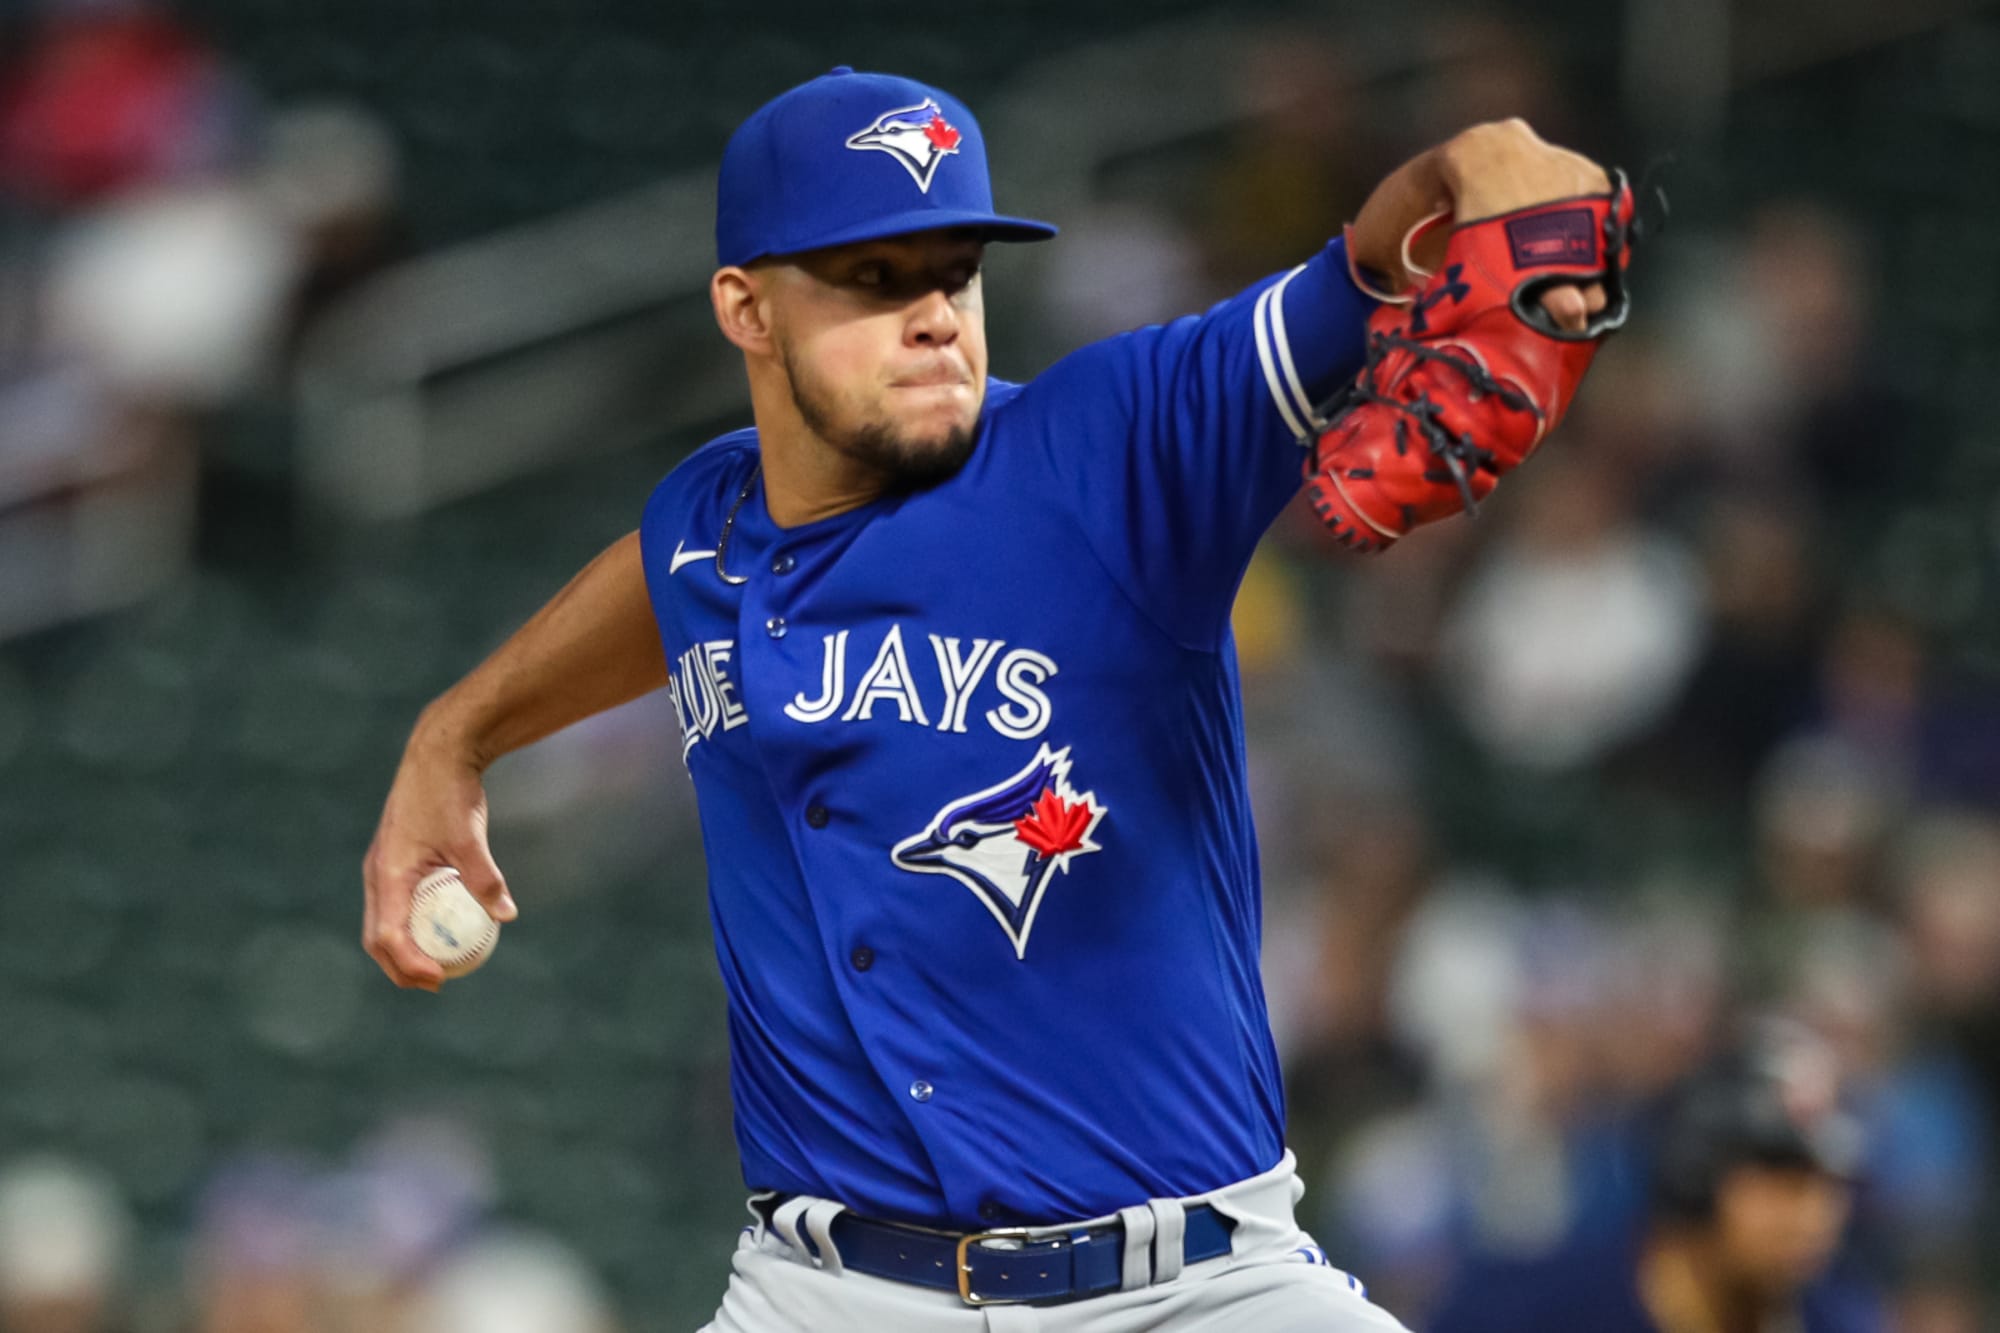 Blue Jays' Berrios working on mechanical adjustments after